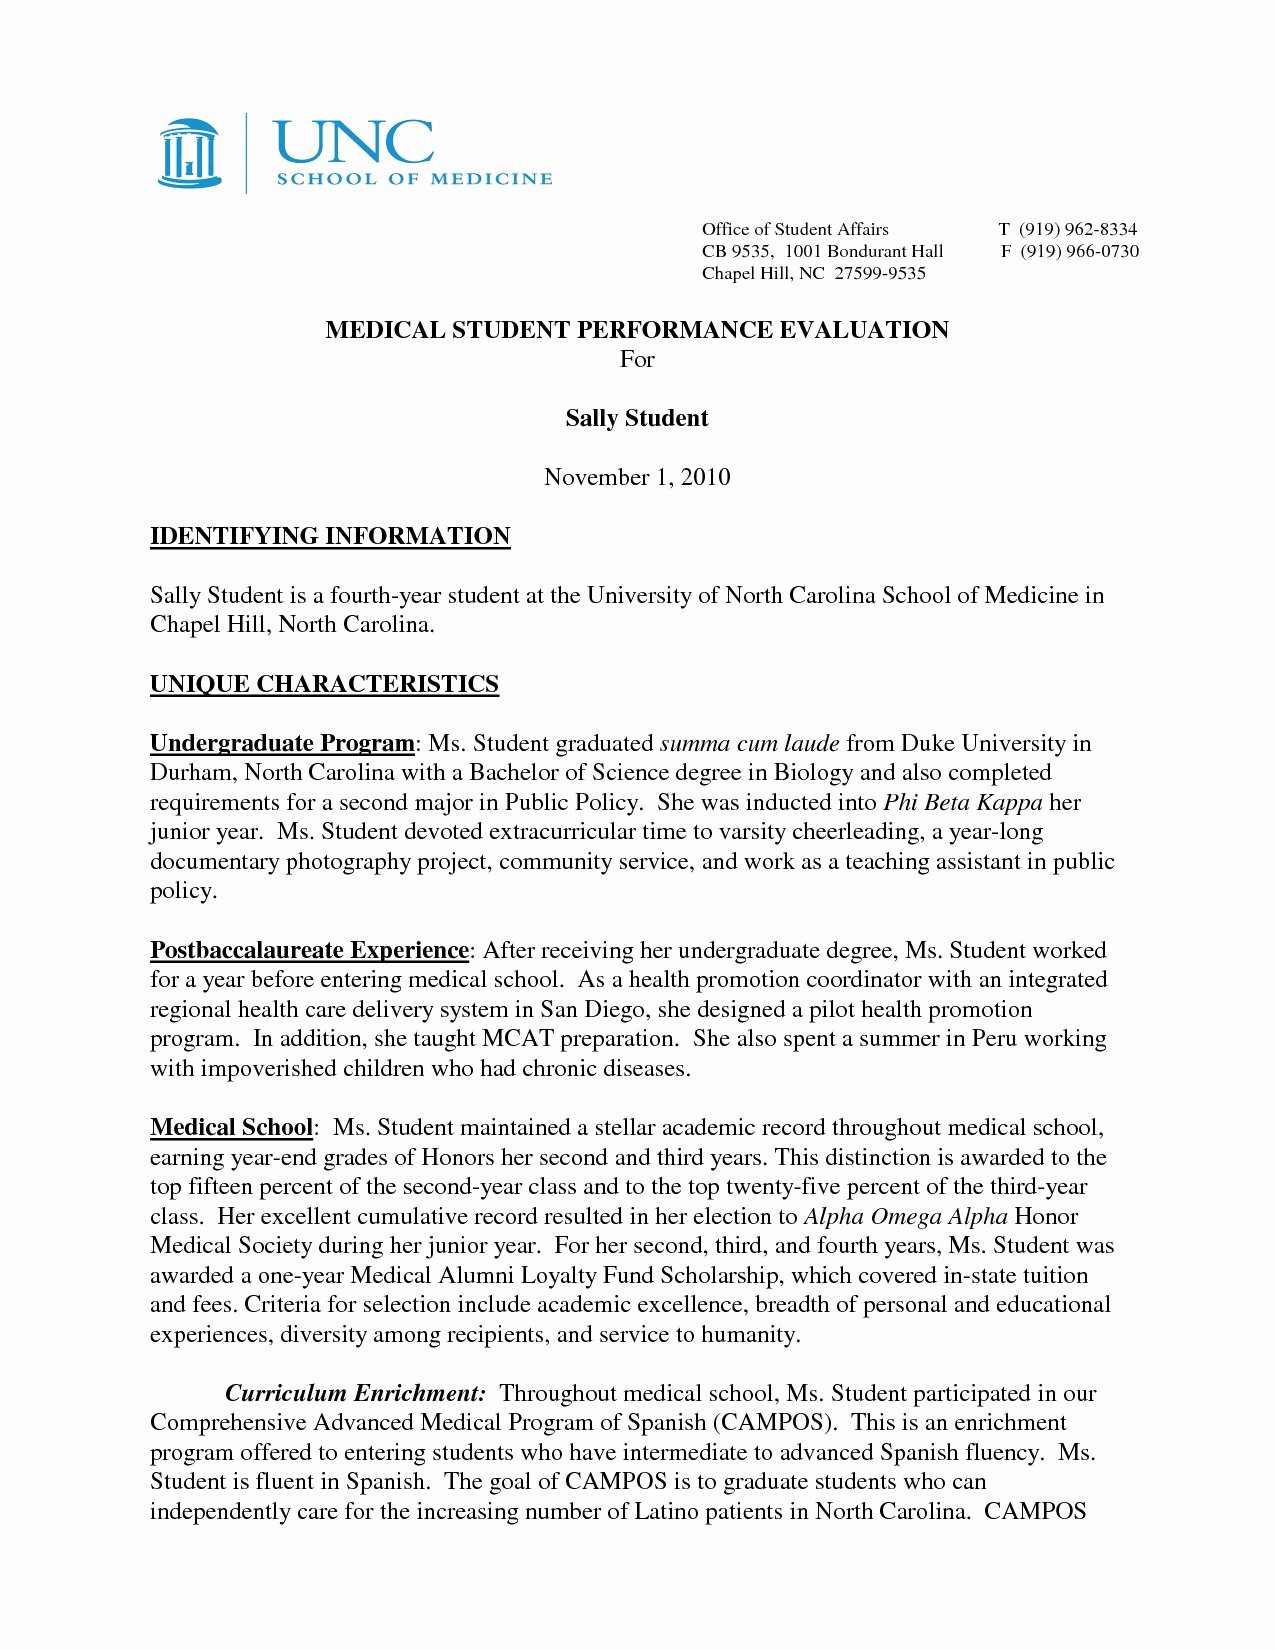 Med School Letter Of Recommendation New Template for Letter Re Mendation for Medical School